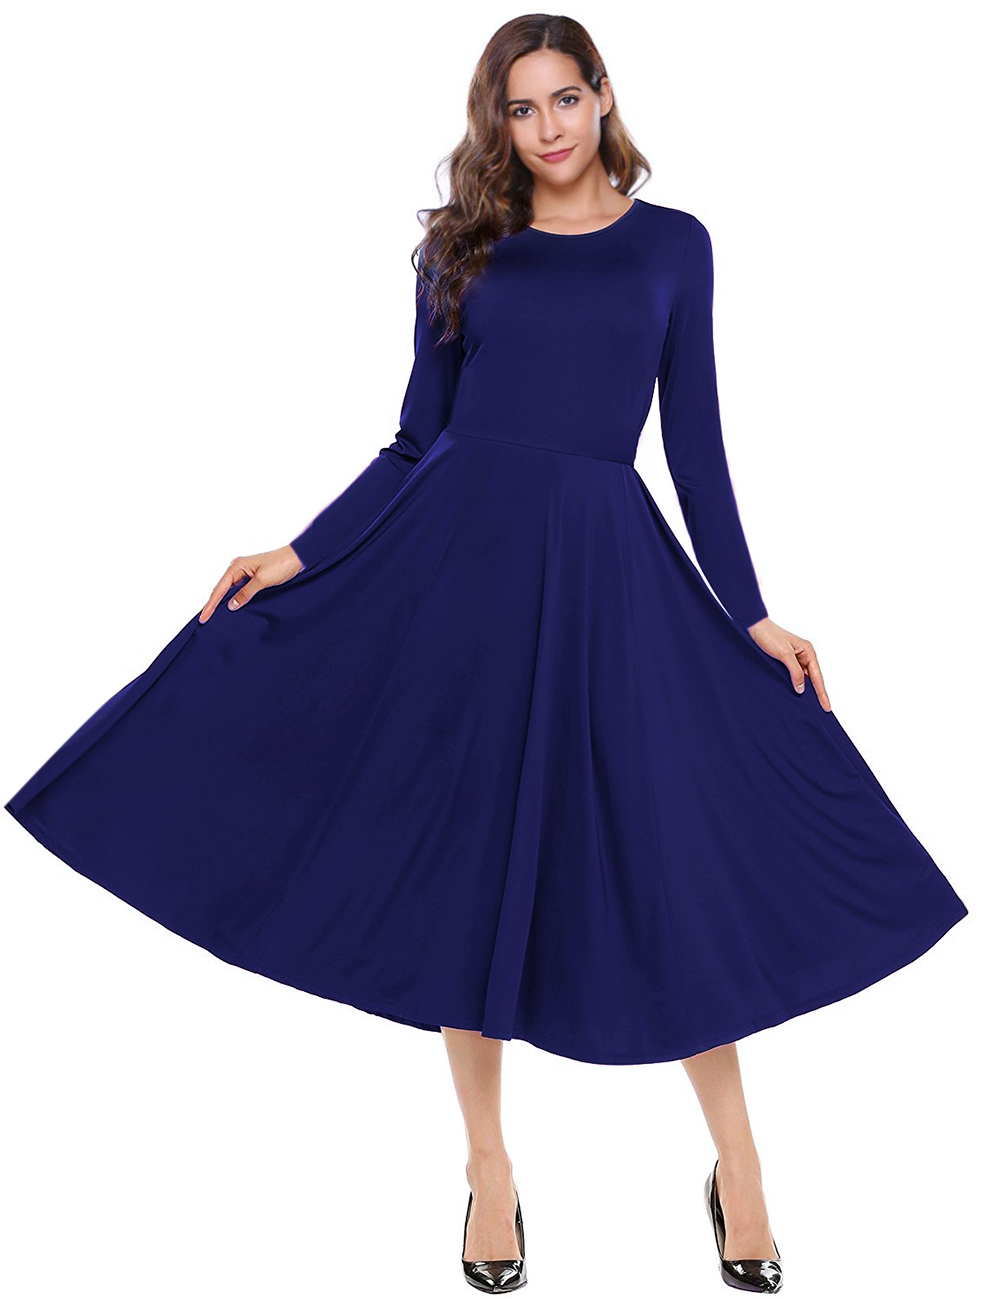 Leadingstar Women's Casual Long Sleeve A-Line Fit and Flare Midi Dress ...